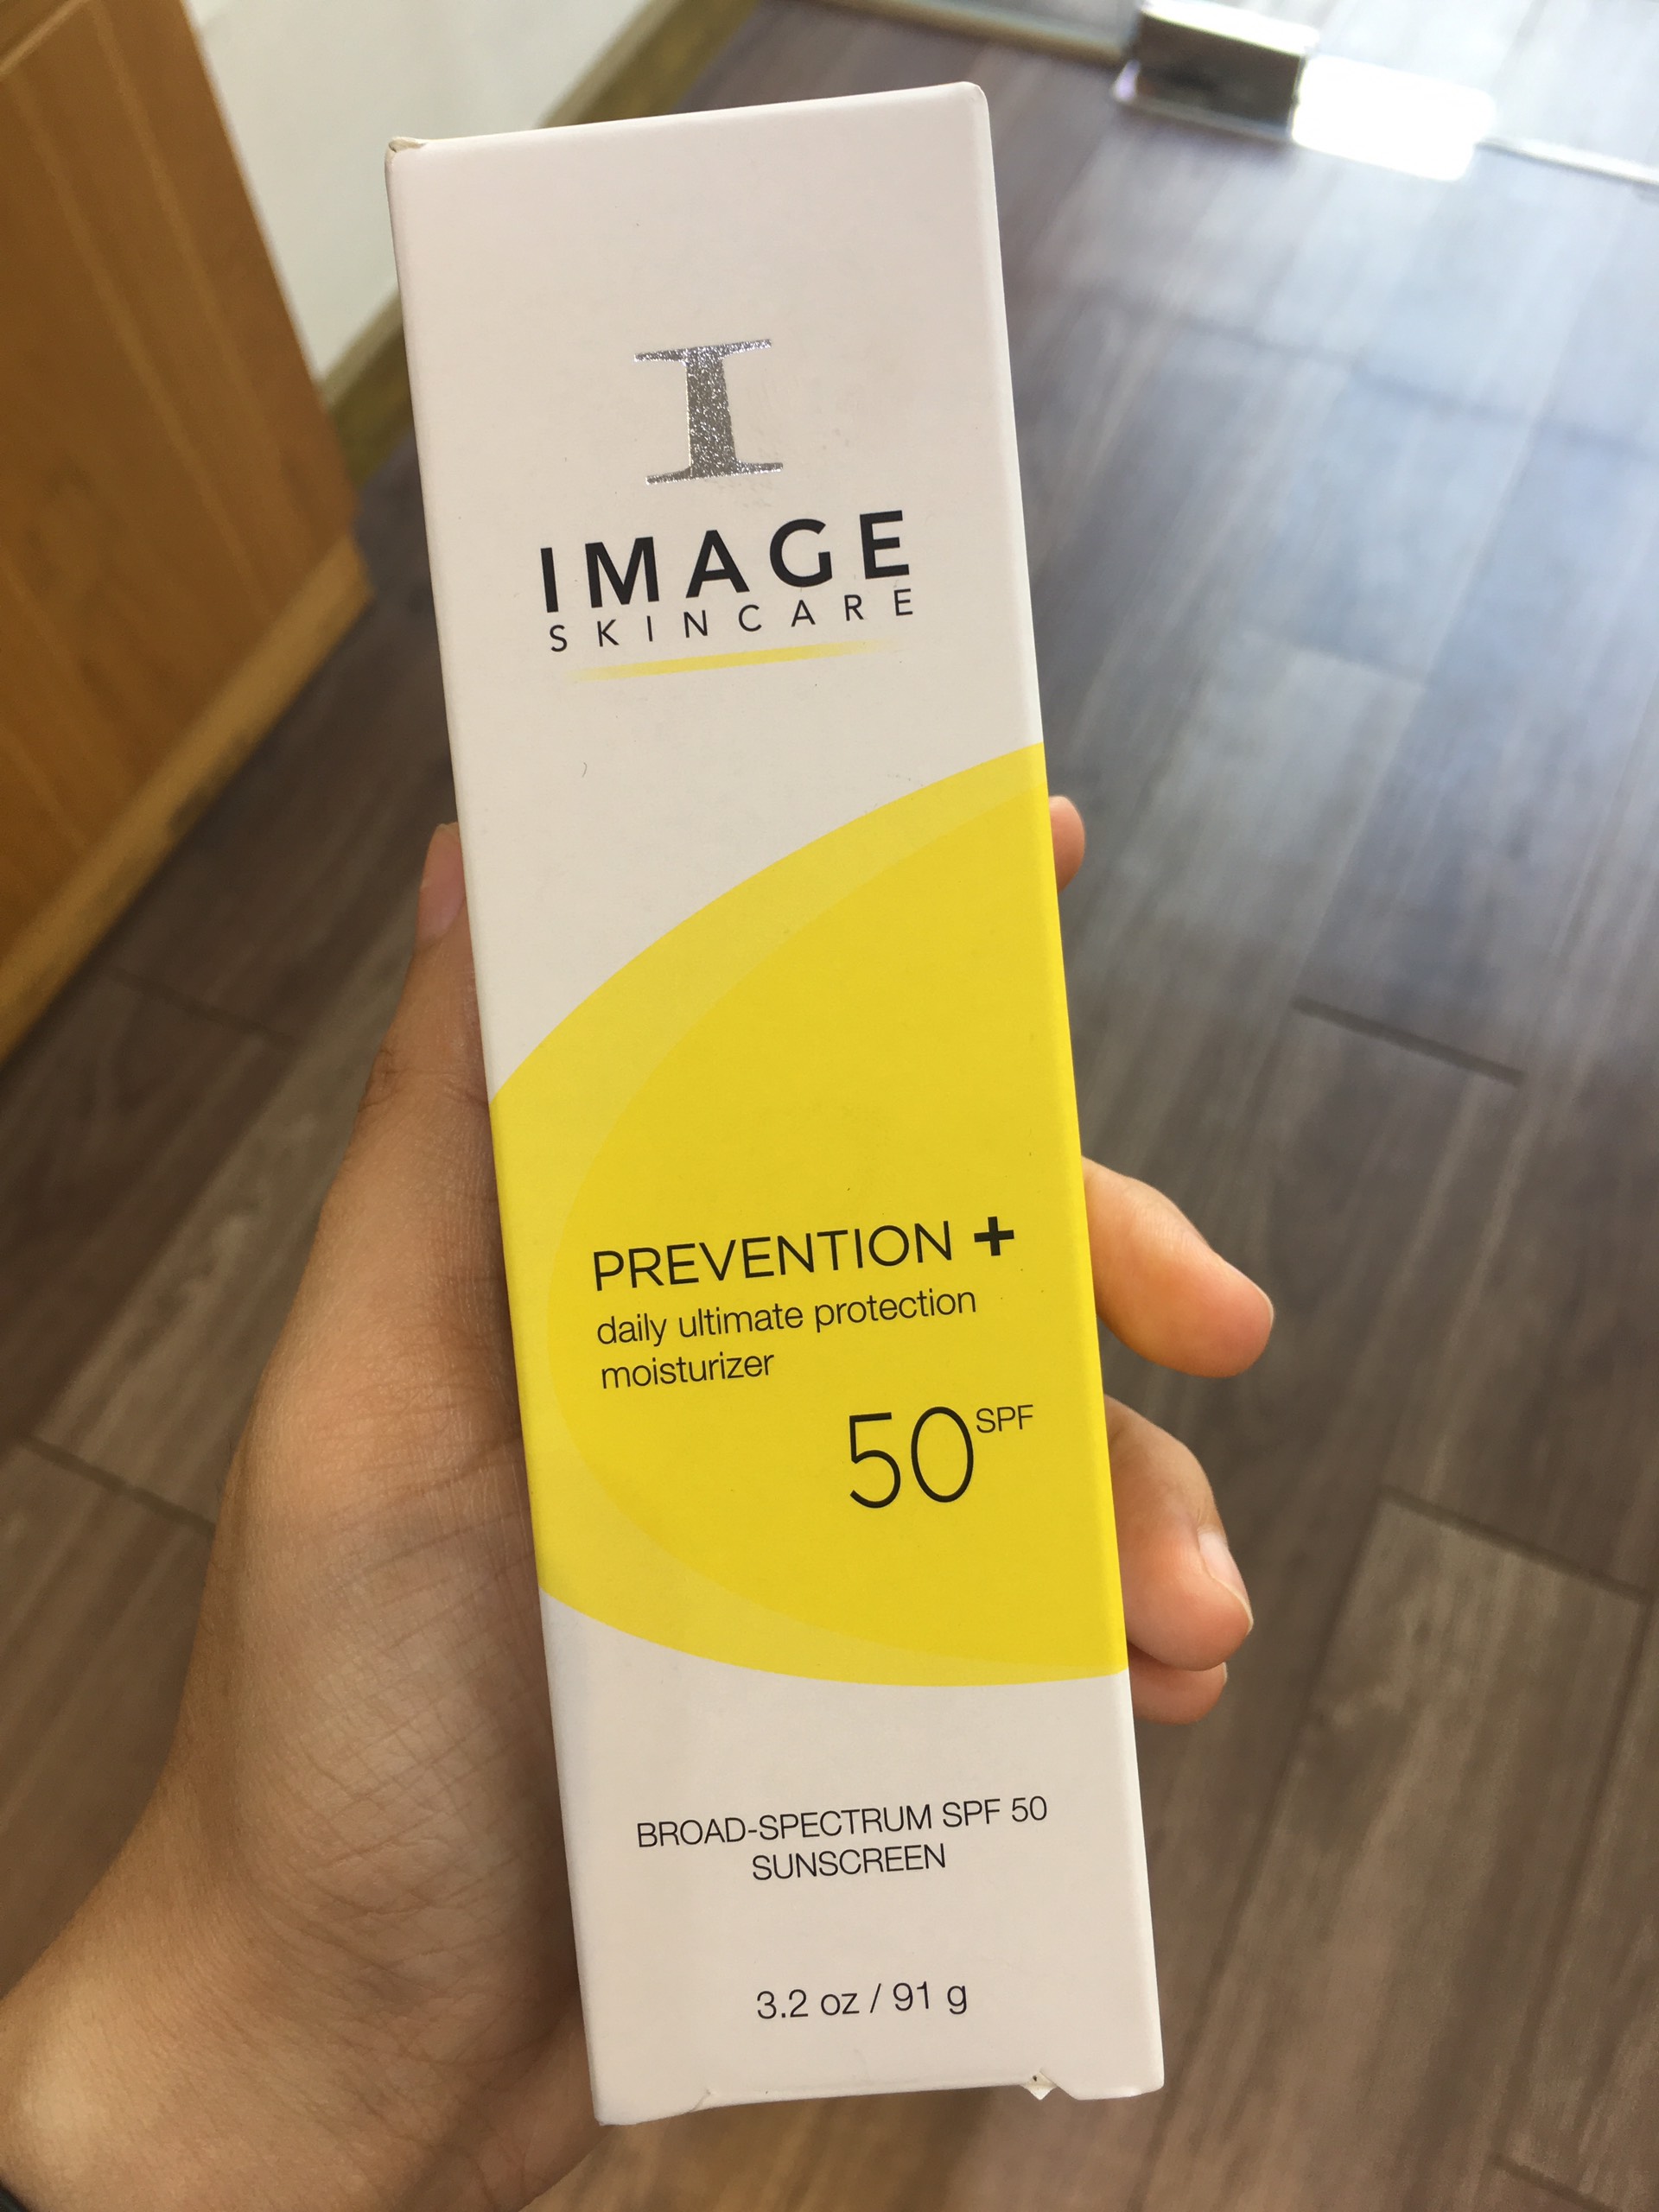 Kem chống nắng cho da hỗn hợp Image Skincare Prevention Daily Ultimate Protection Moisturizer SPF50